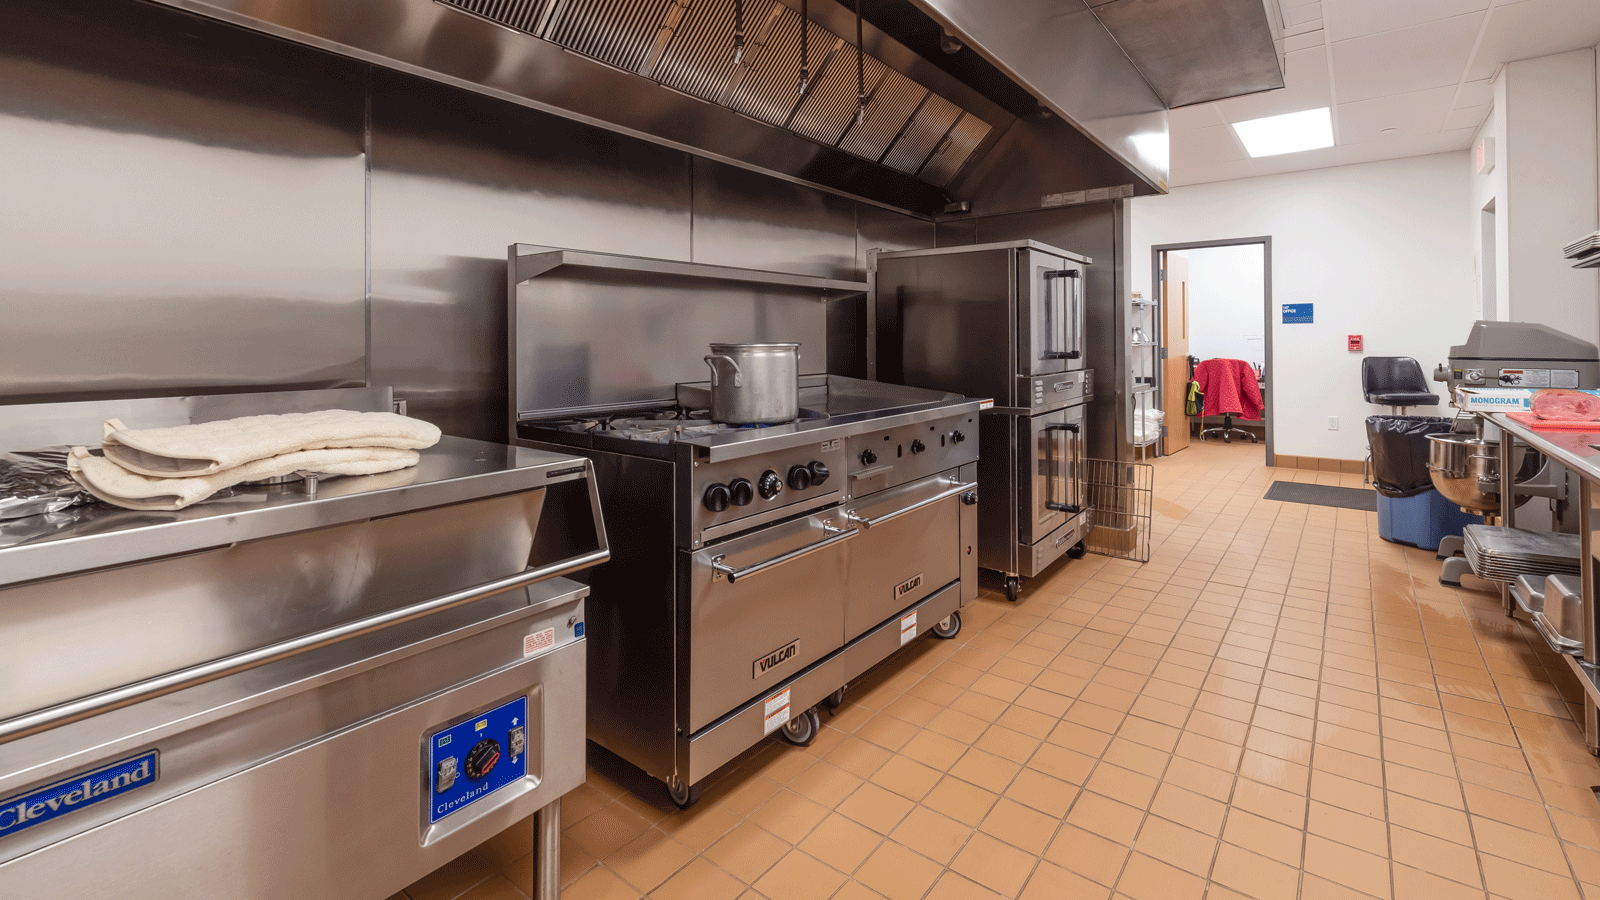 education and schools, commercial kitchen